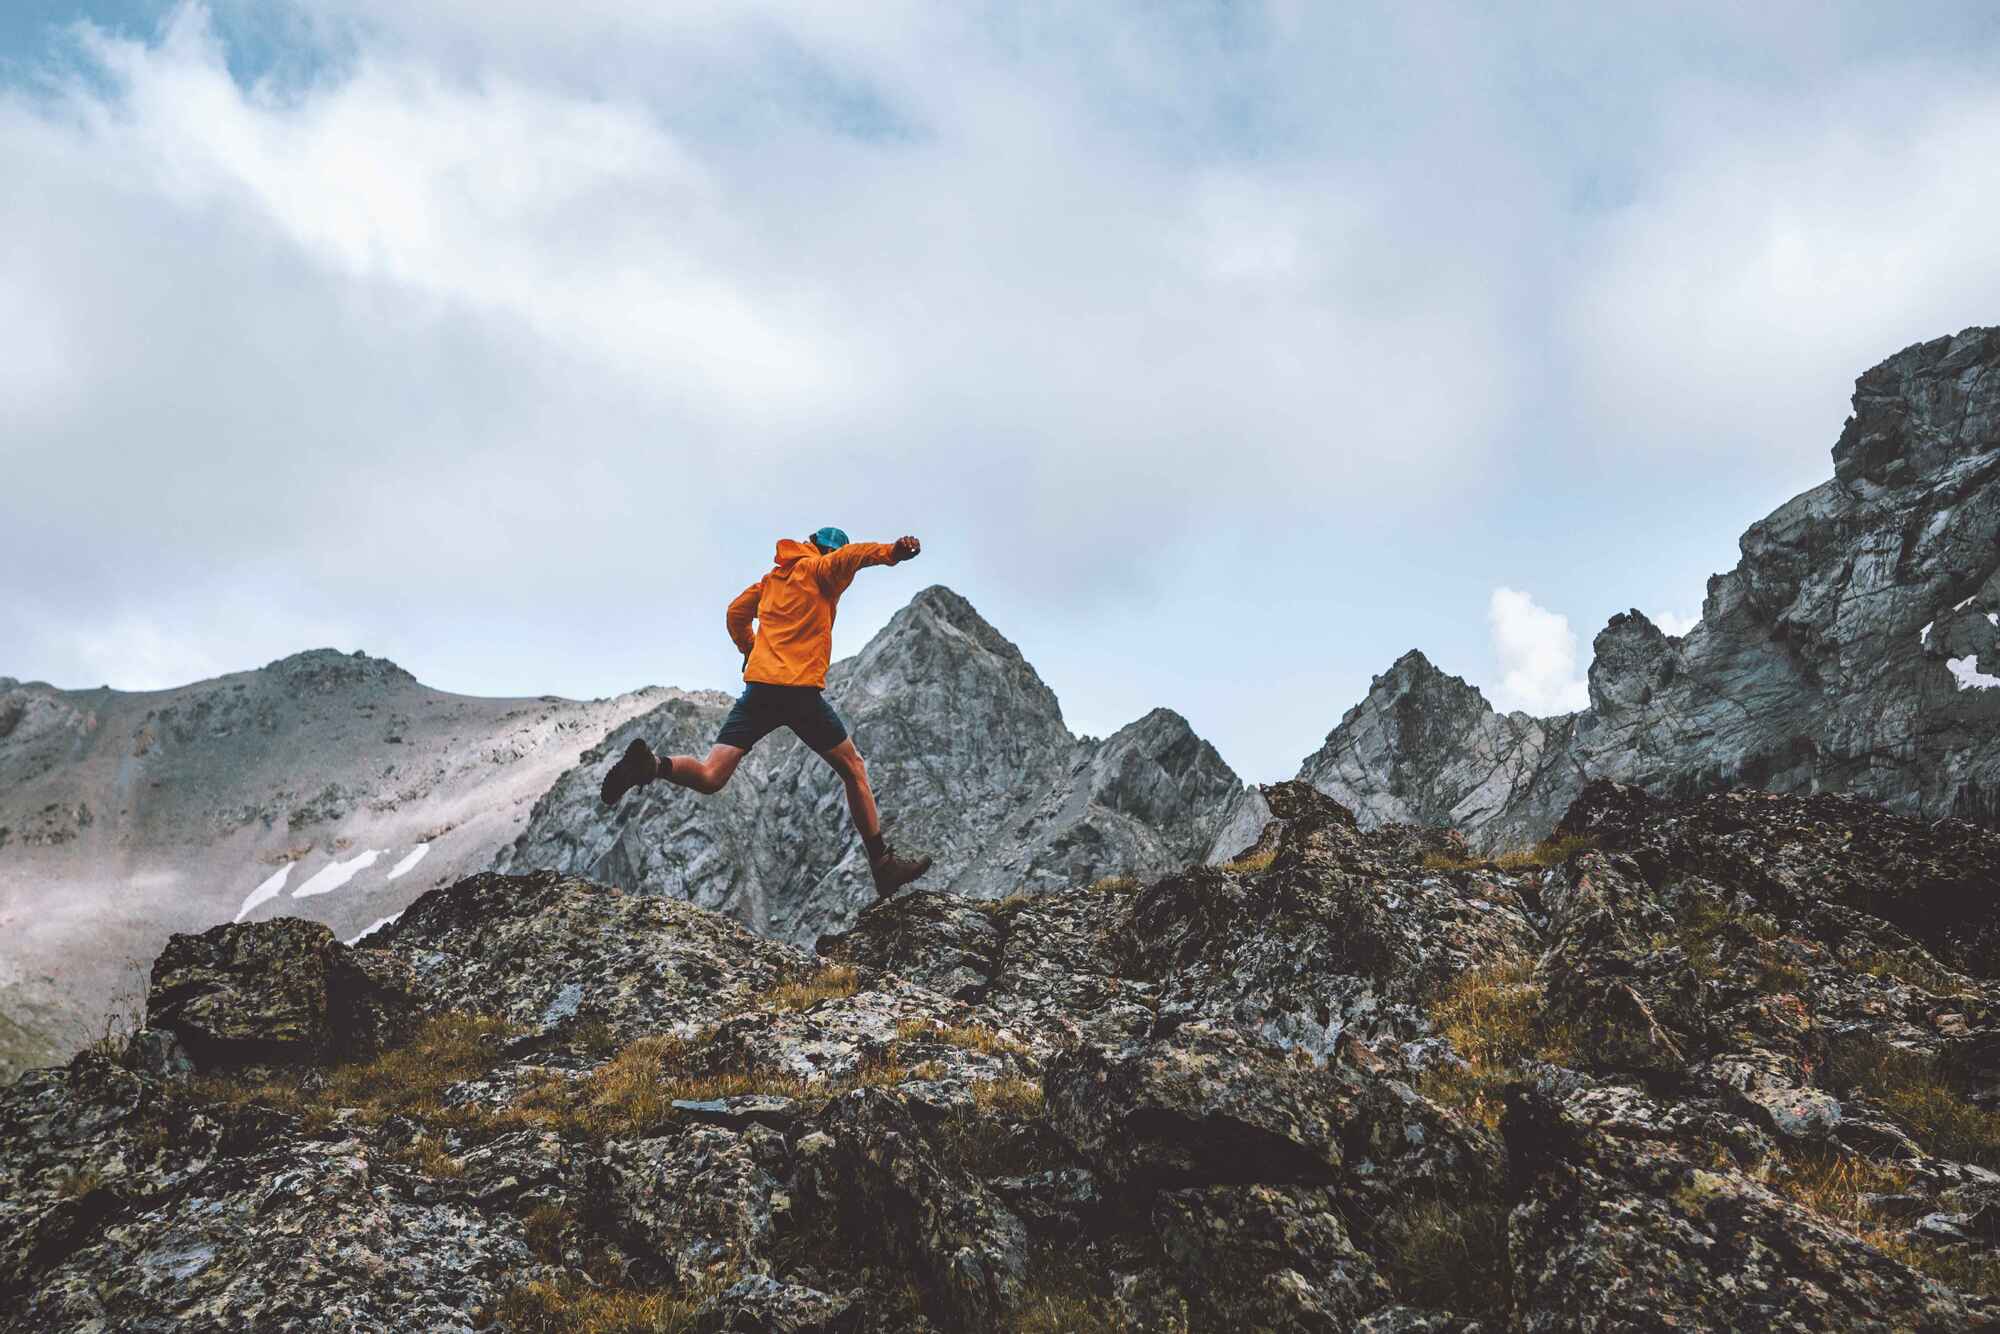 Man running over craggy rocks in the mountains